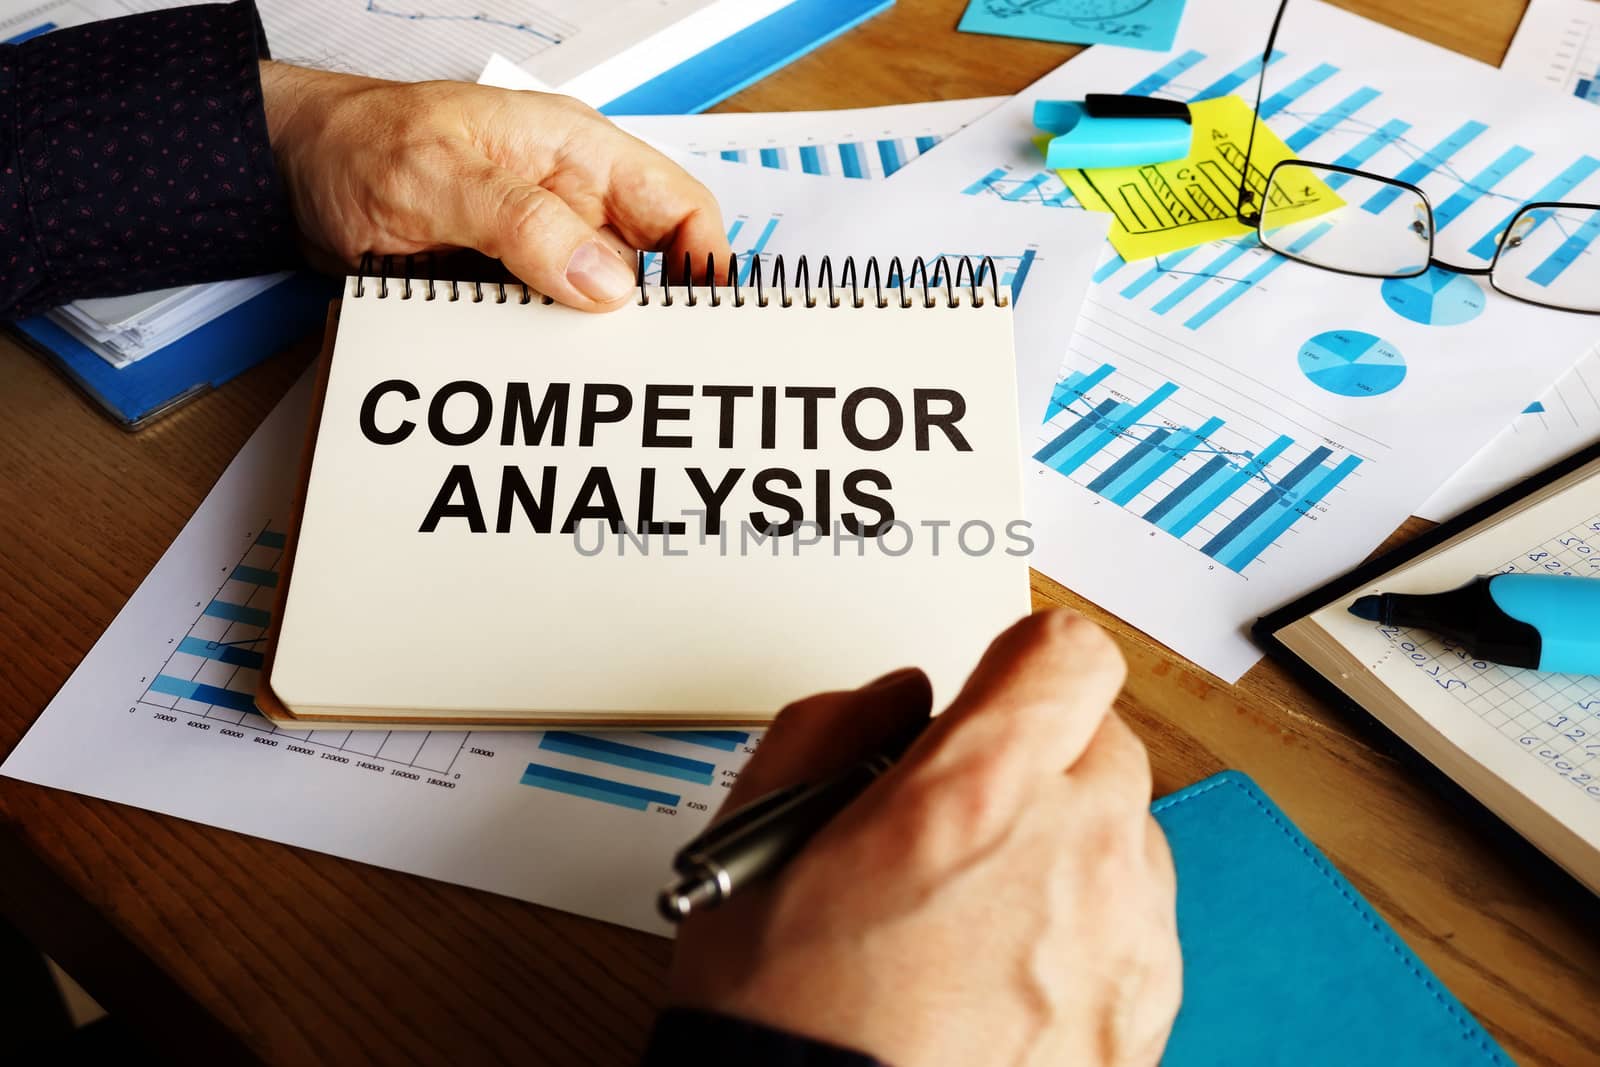 Competitor analysis report in the man hands. by designer491